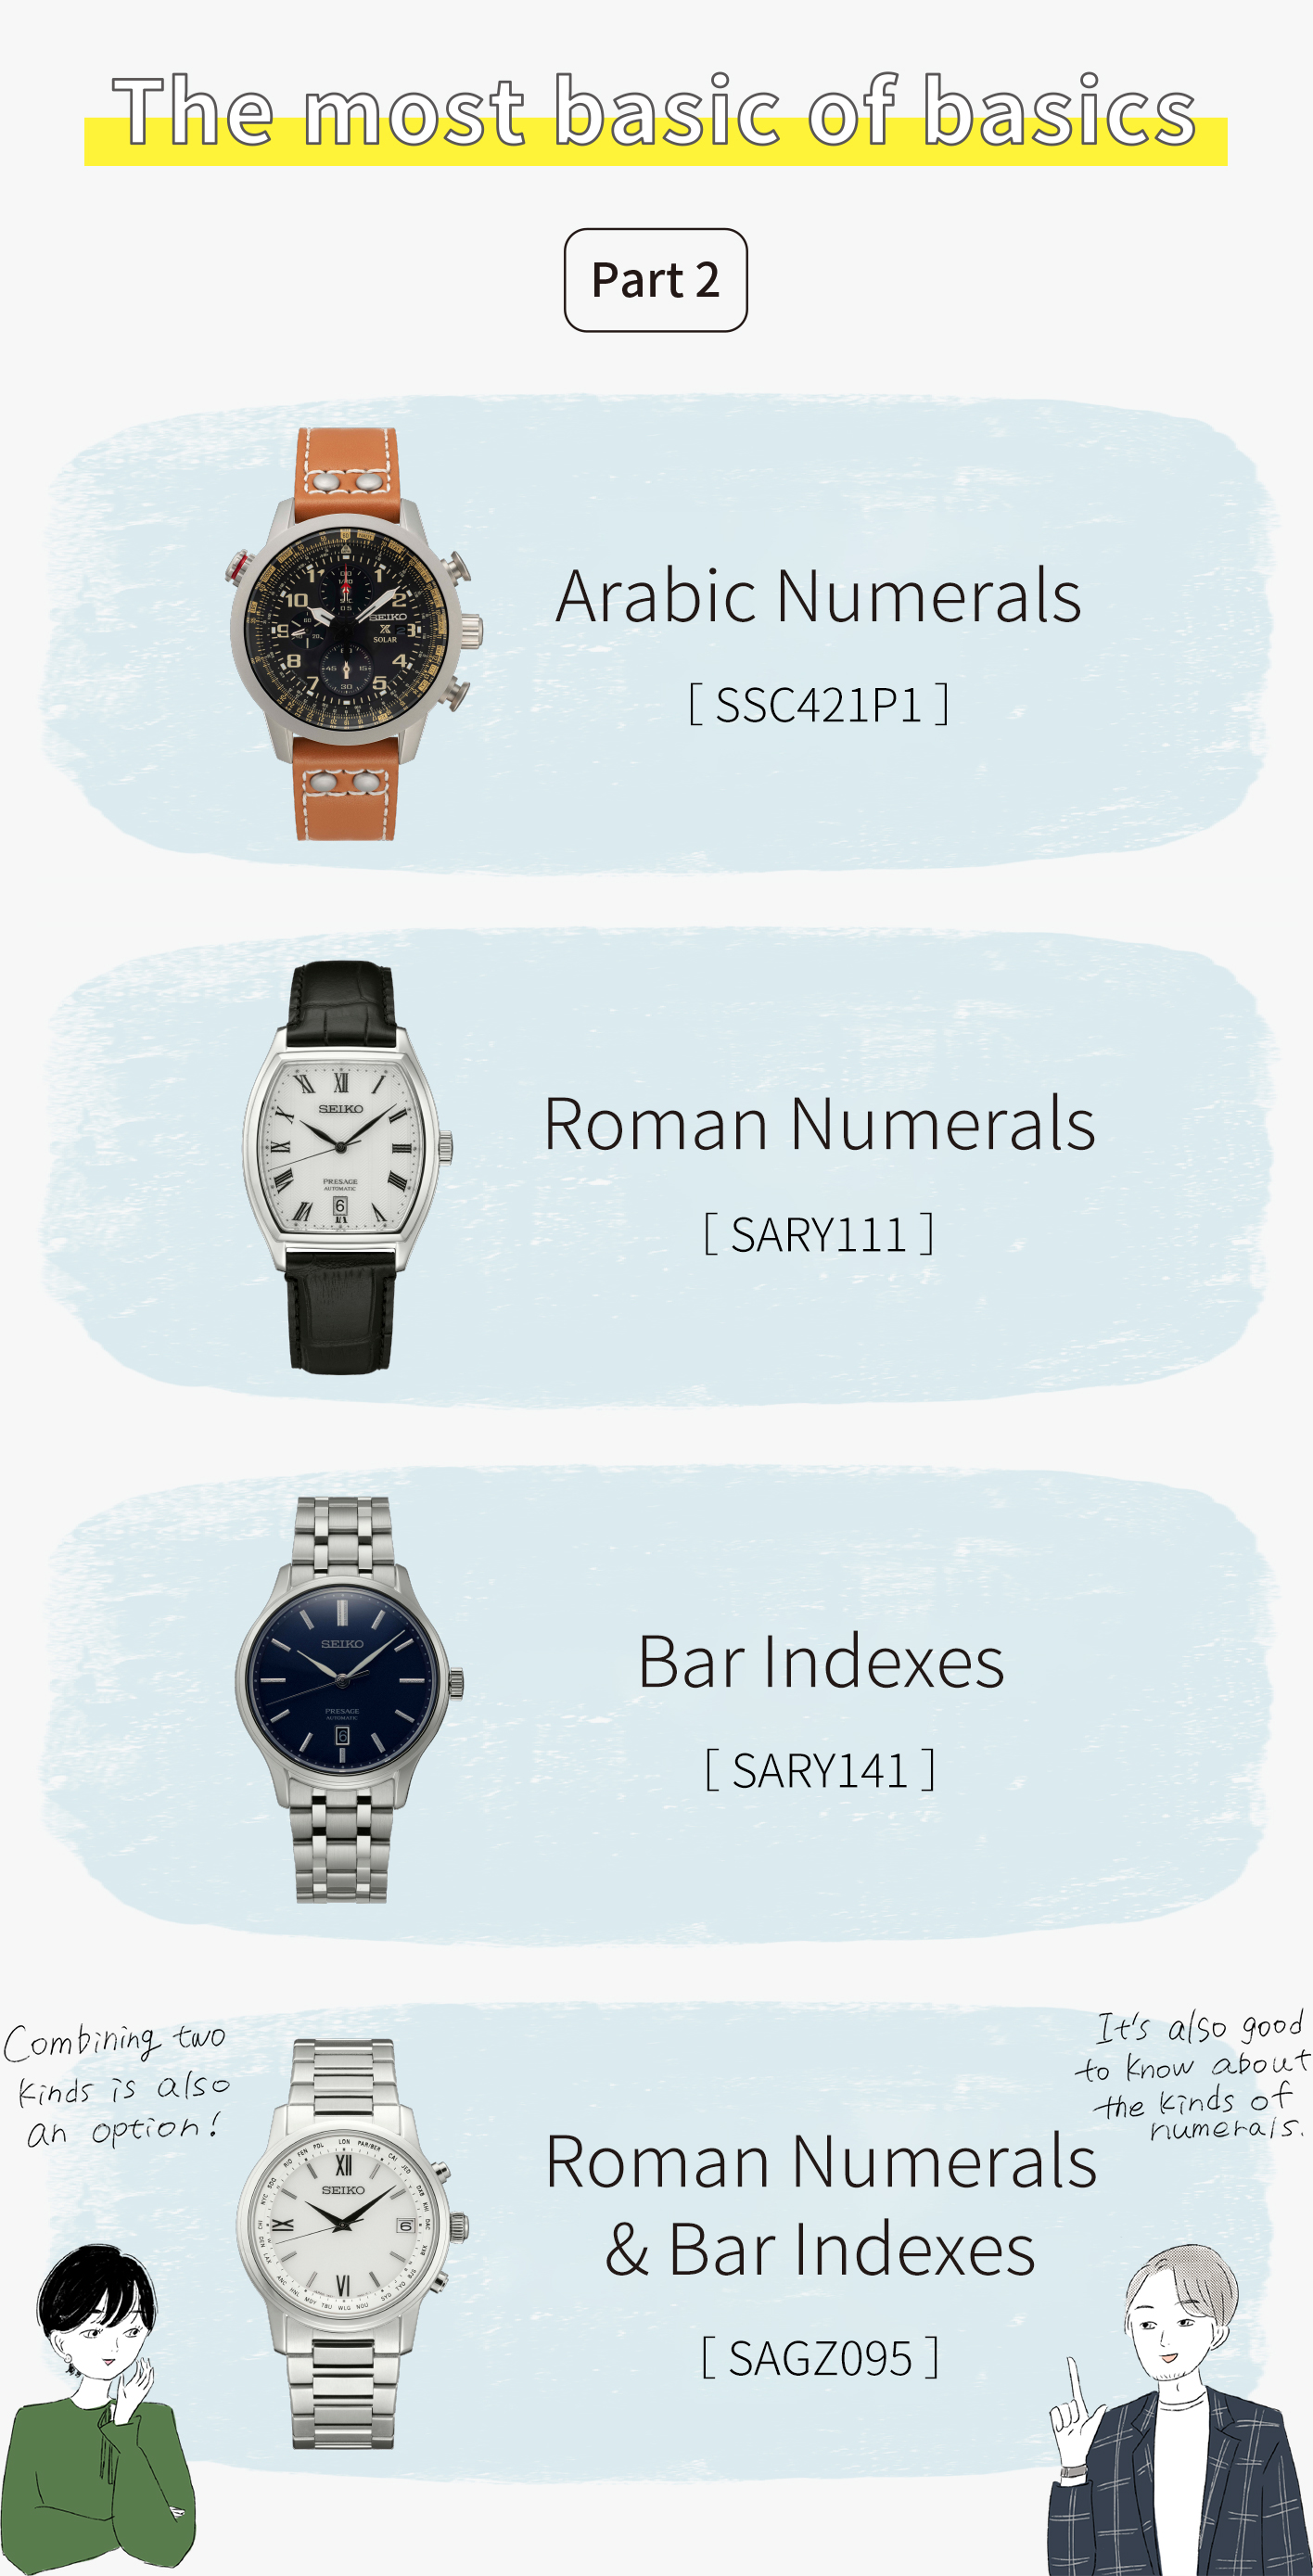 The most basic of basics: Part 2 / Combining two kinds is also an option! / It’s also good to know about the kinds of numerals. / Arabic Numerals [SSC421P1], Roman Numerals [SARY111], Bar Indexes [SARY141], Roman Numerals & Bar Indexes [SAGZ095]